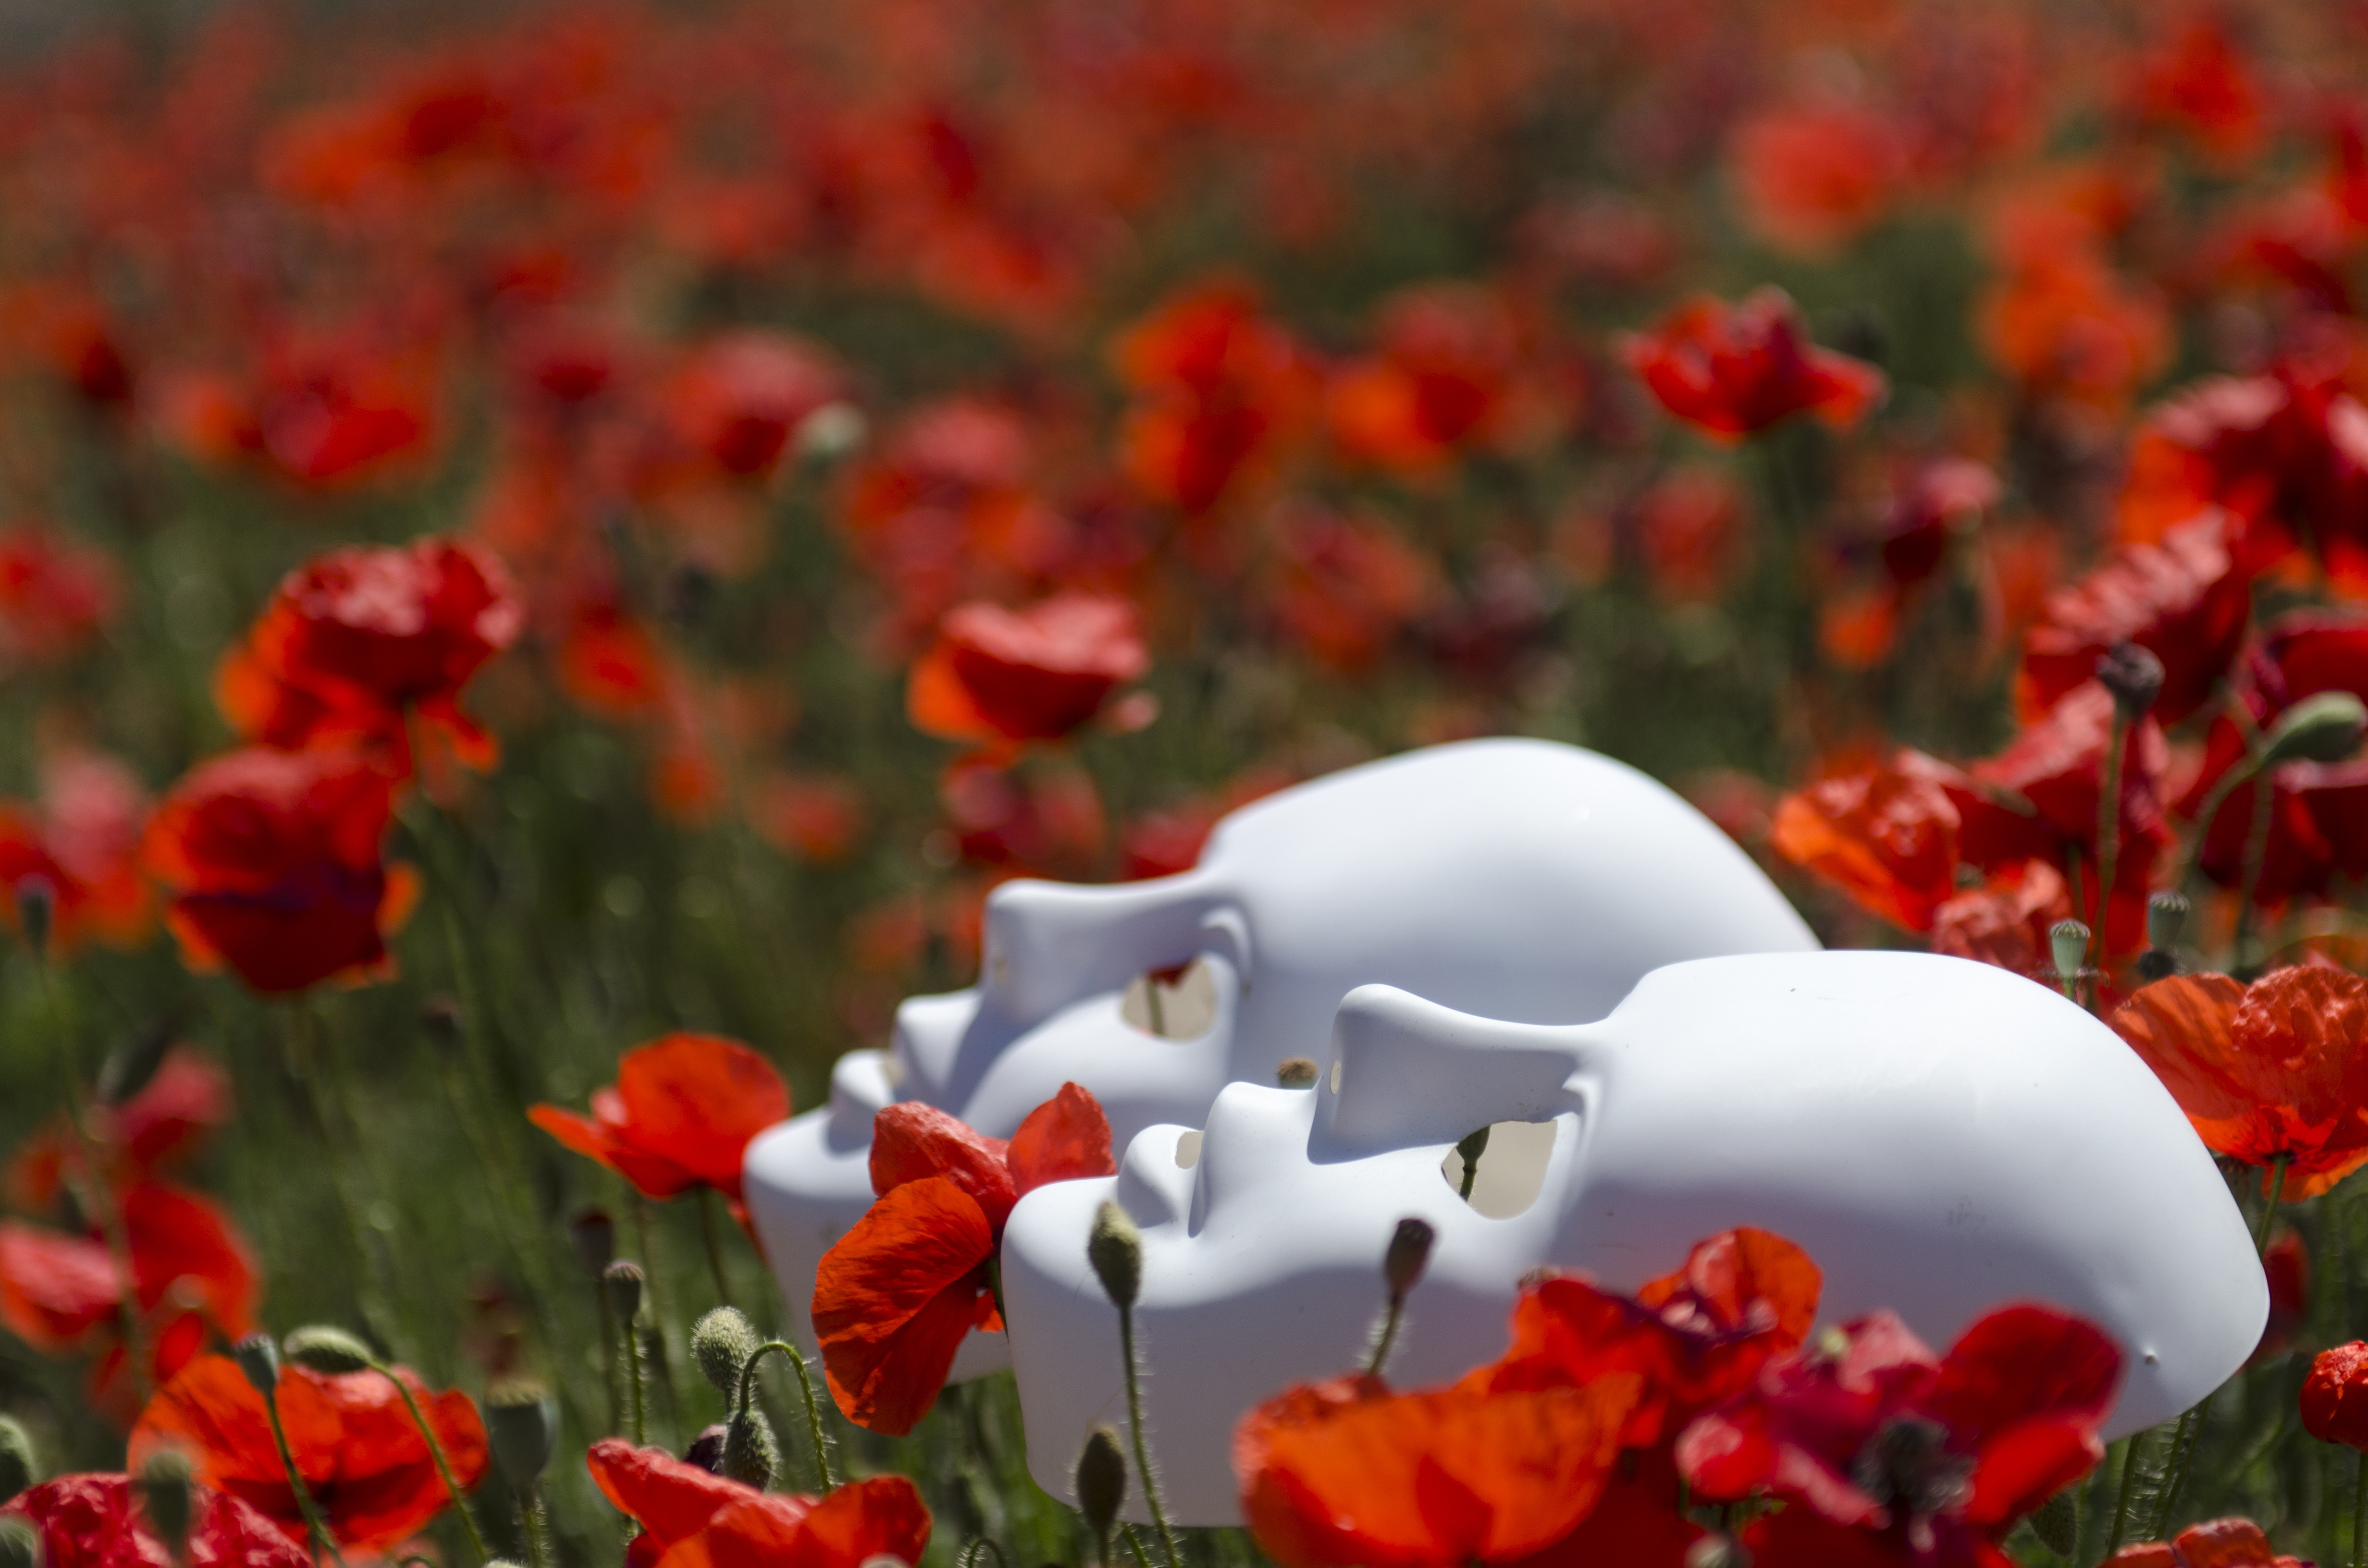 flowers, poppies, masks, miscellanea, miscellaneous wallpaper for mobile